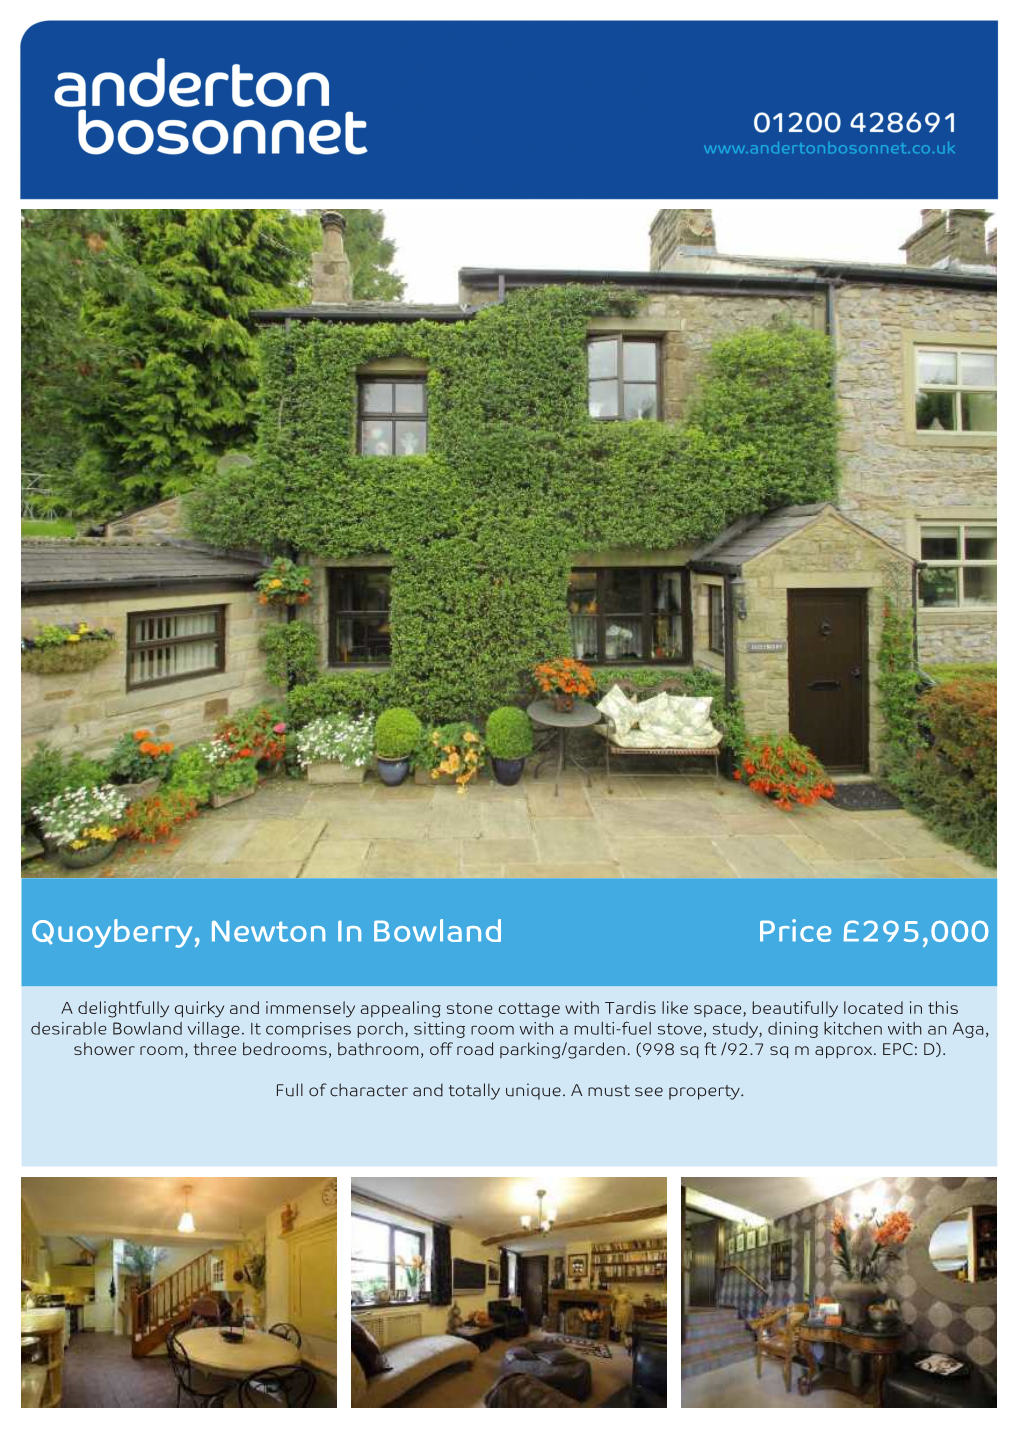 Quoyberry, Newton in Bowland Price £295,000